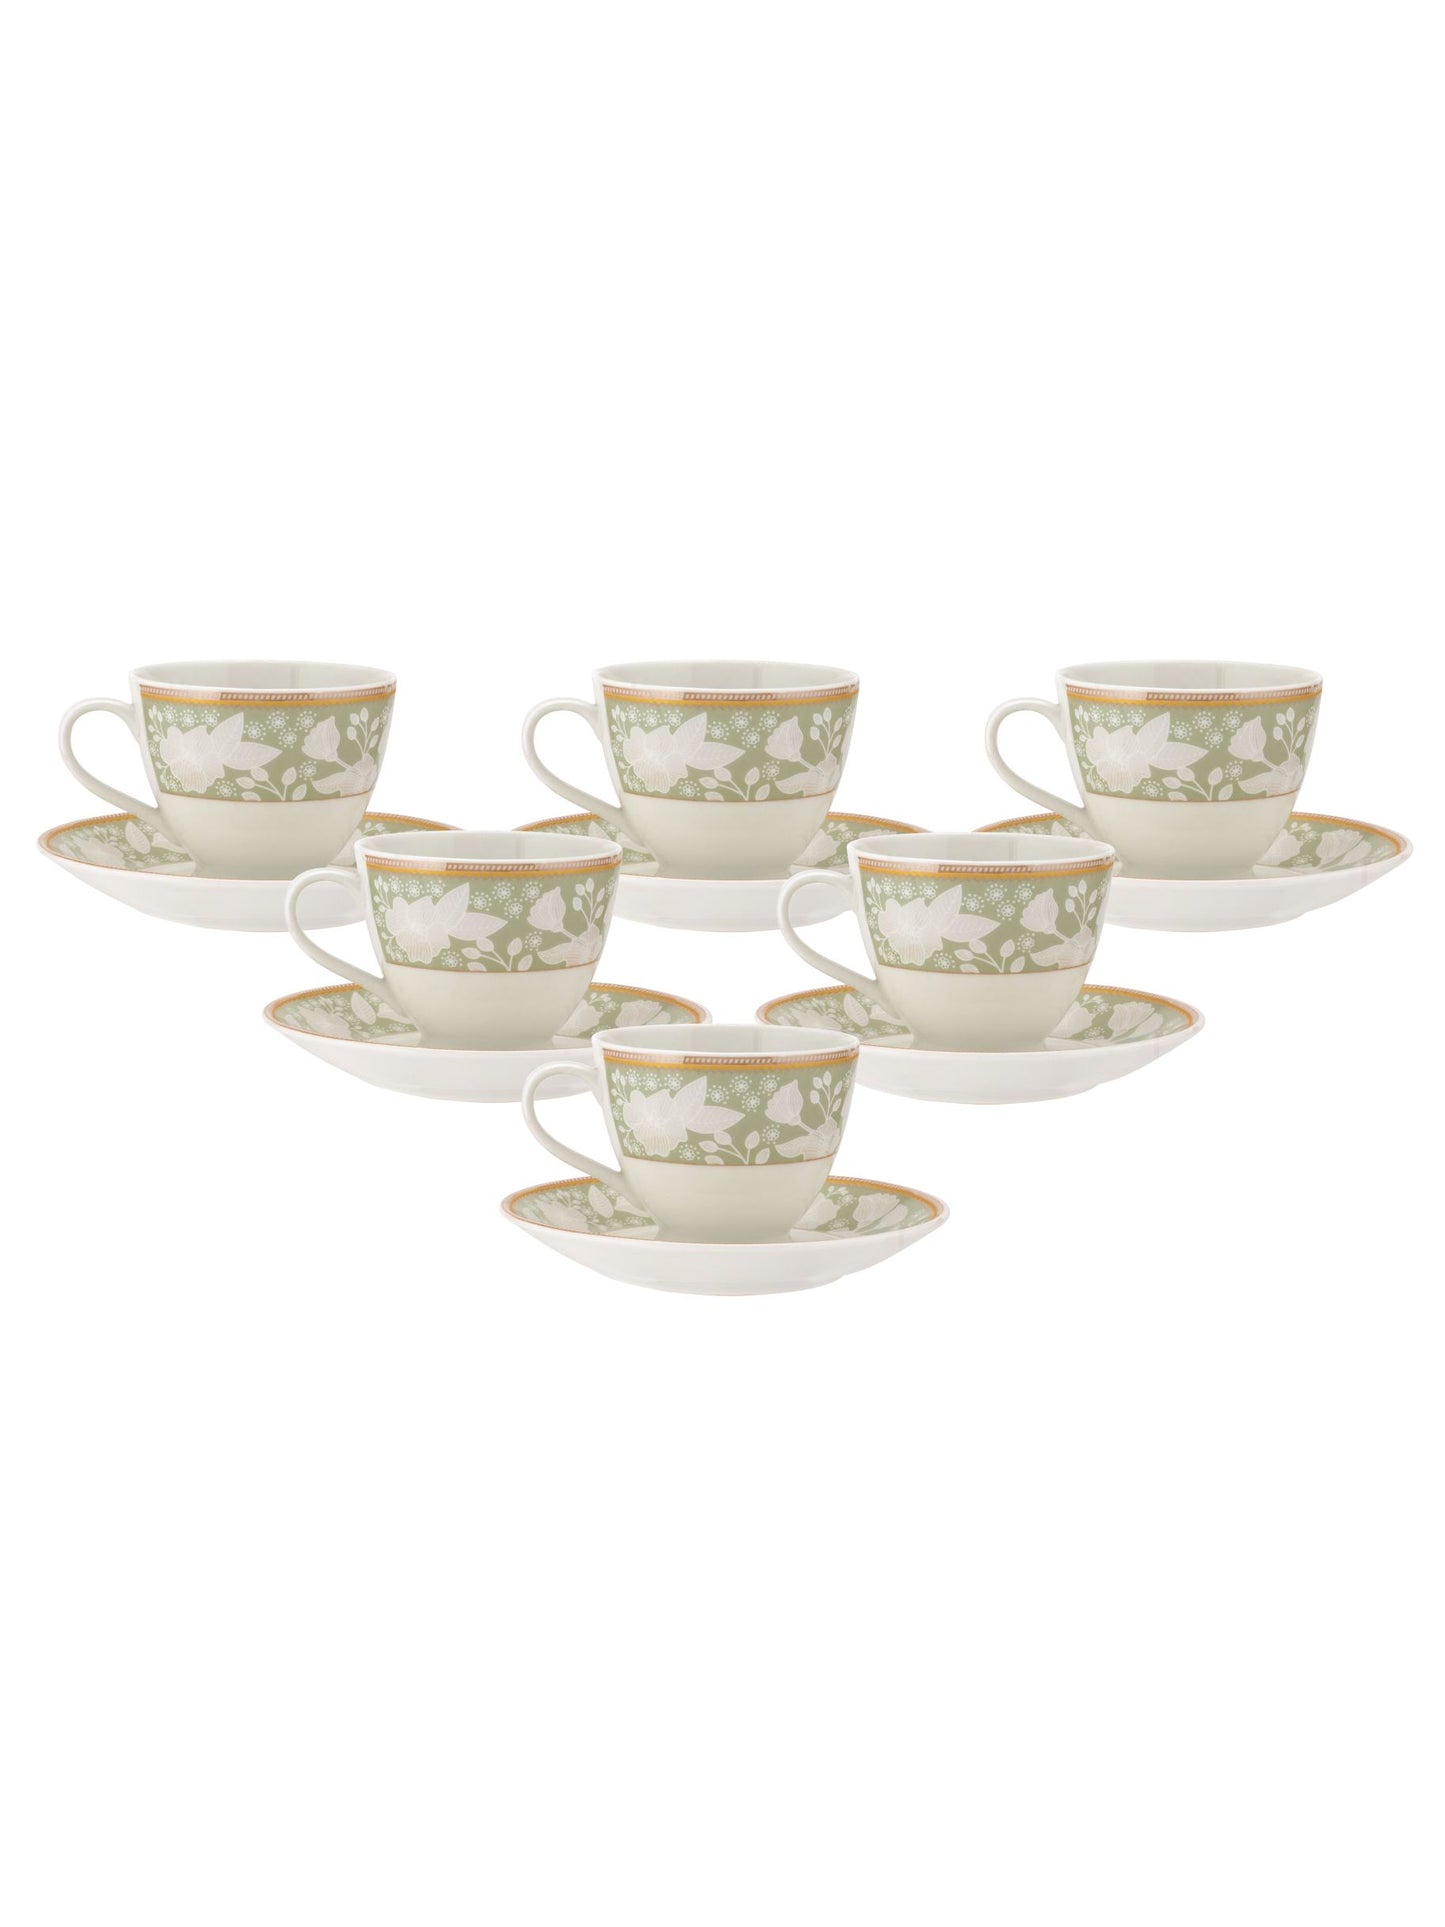 King Super Cup & Saucer, 160 ml, Set of 12 (6 Cups + 6 Saucers) (S387)